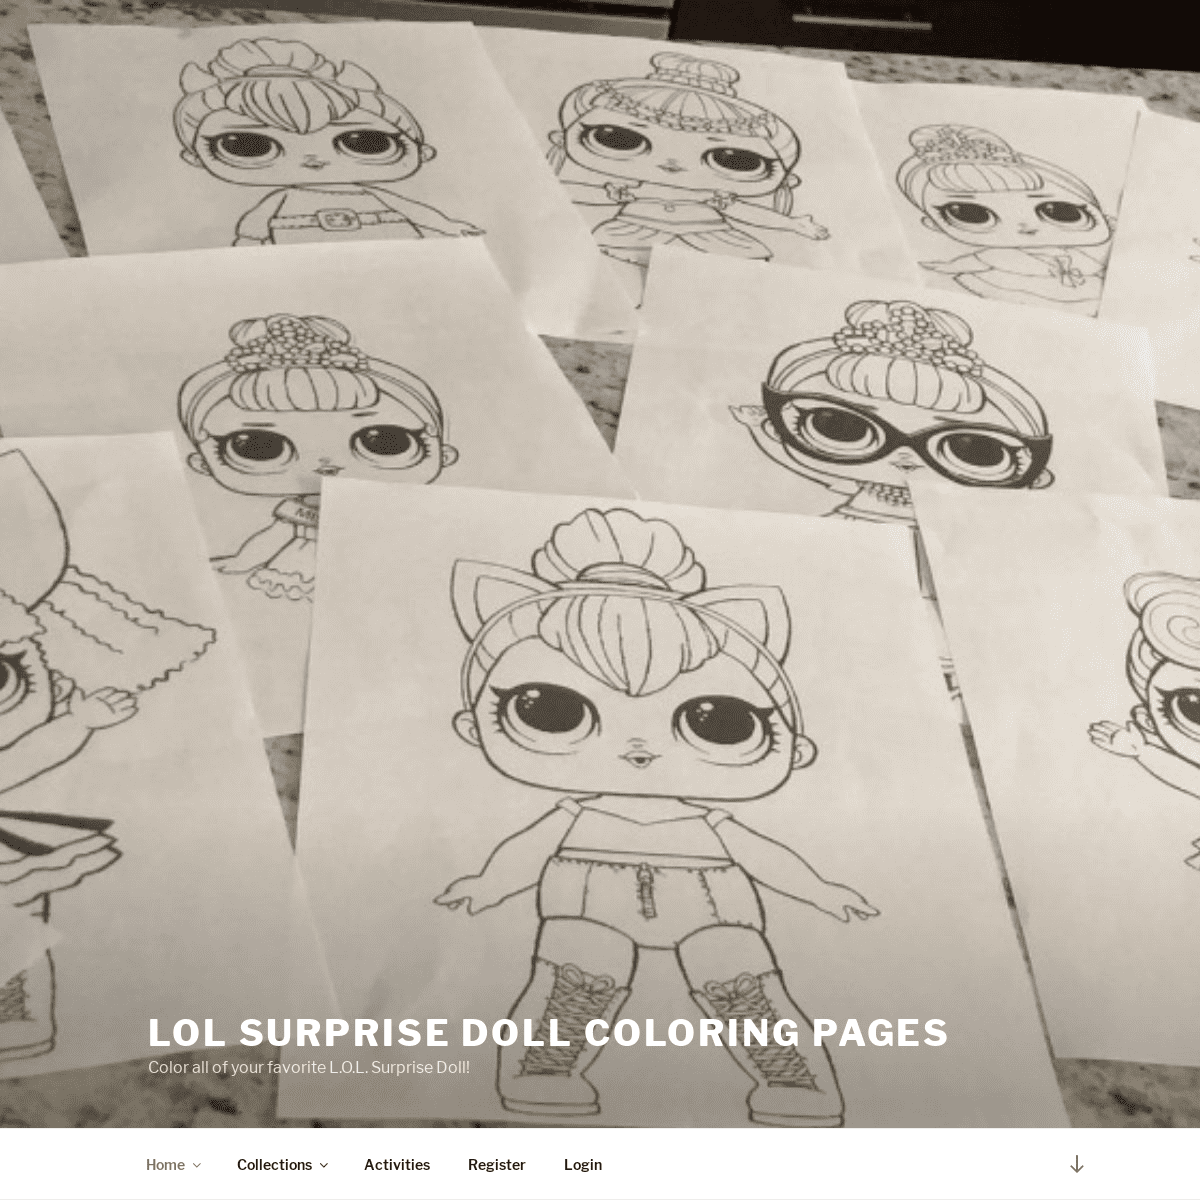 LOL Surprise Doll Coloring Pages – Color all of your favorite L.O.L. Surprise Doll!